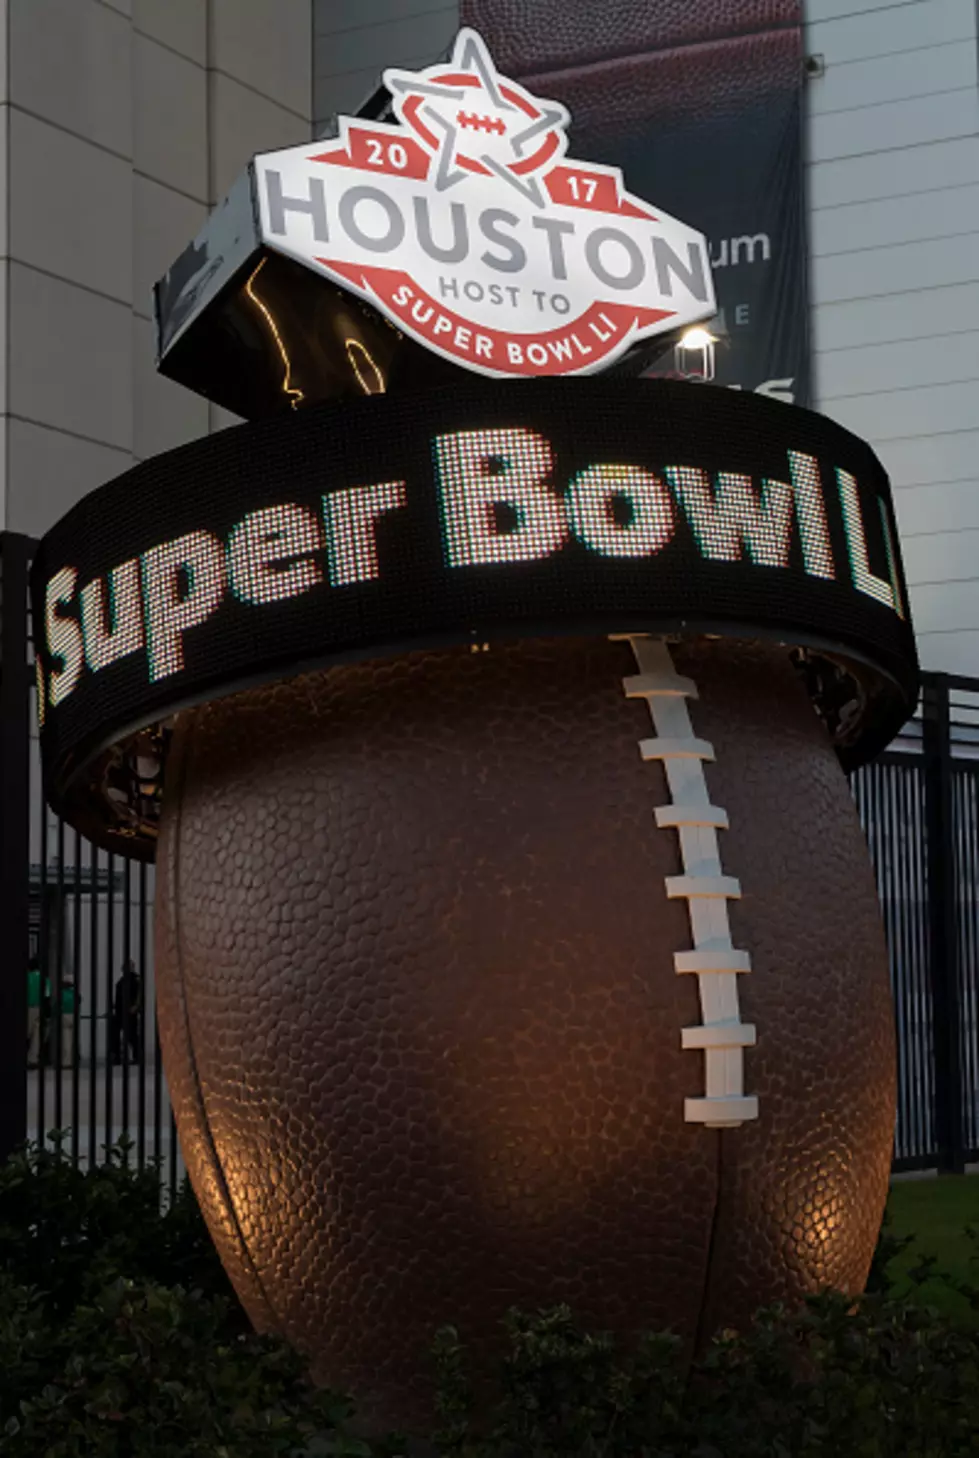 The Staggering Cost of Attending the Super Bowl